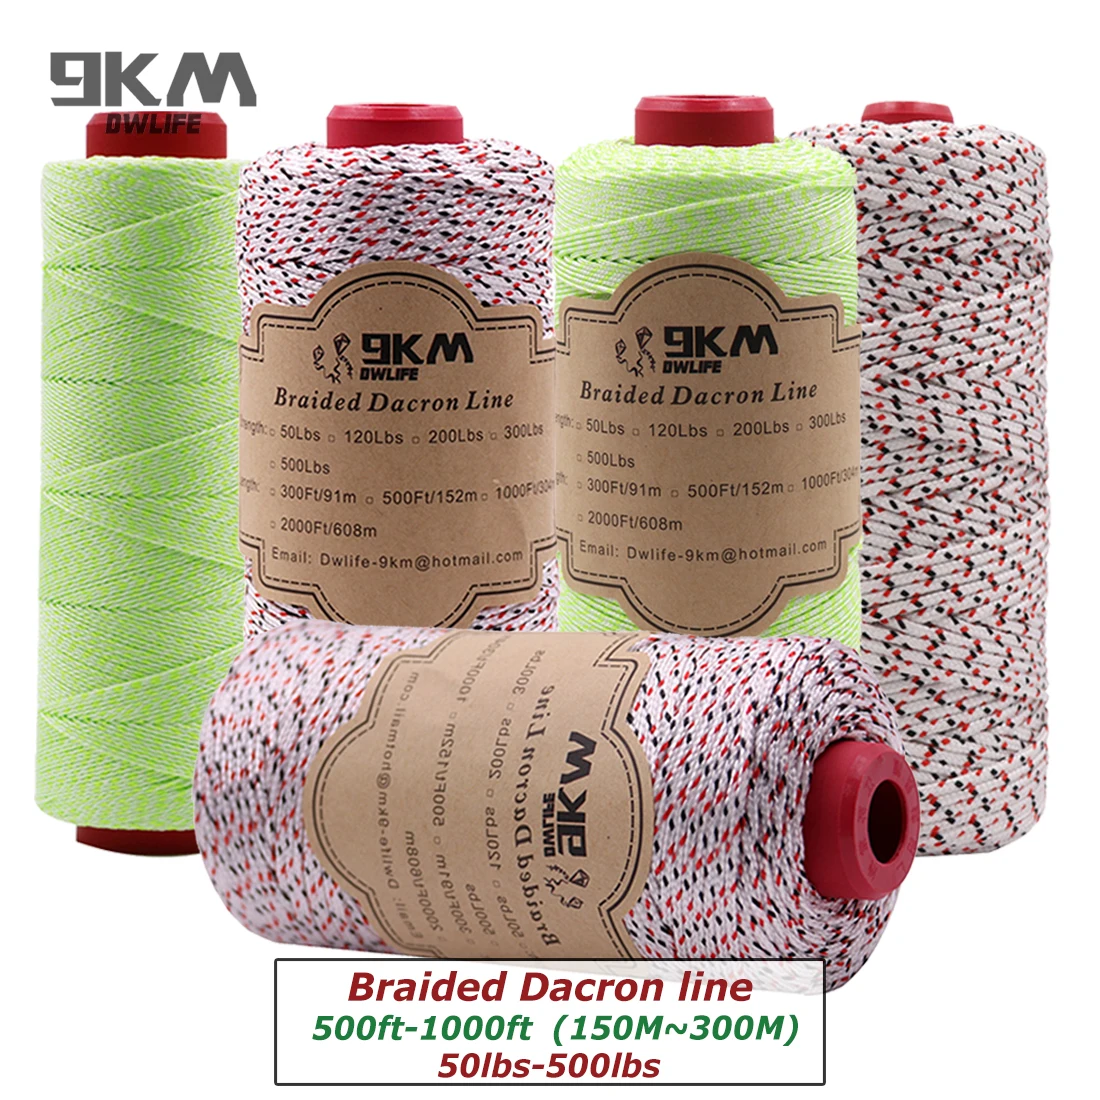 Aliexpress - Braided Dacron Fishing Line Outdoor Kite Line 500-1000ft Multi-Functional Camping Flag Tying Band Fishing Applications 50-500Lbs